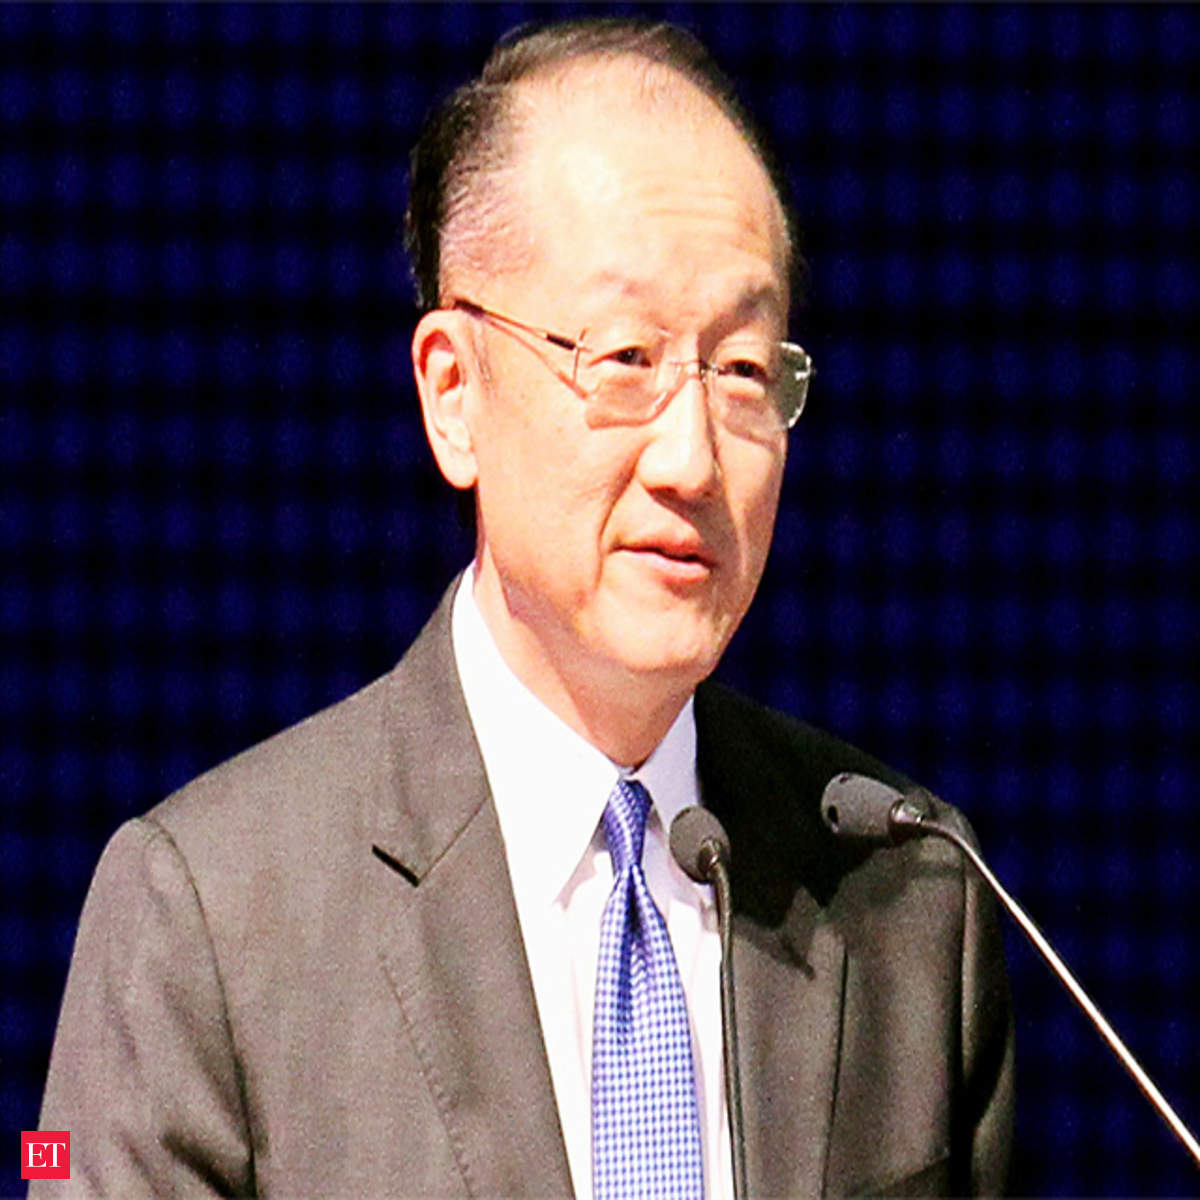 indian economy is expected to grow at 6.4% in 2015, says world bank president jim yong kim